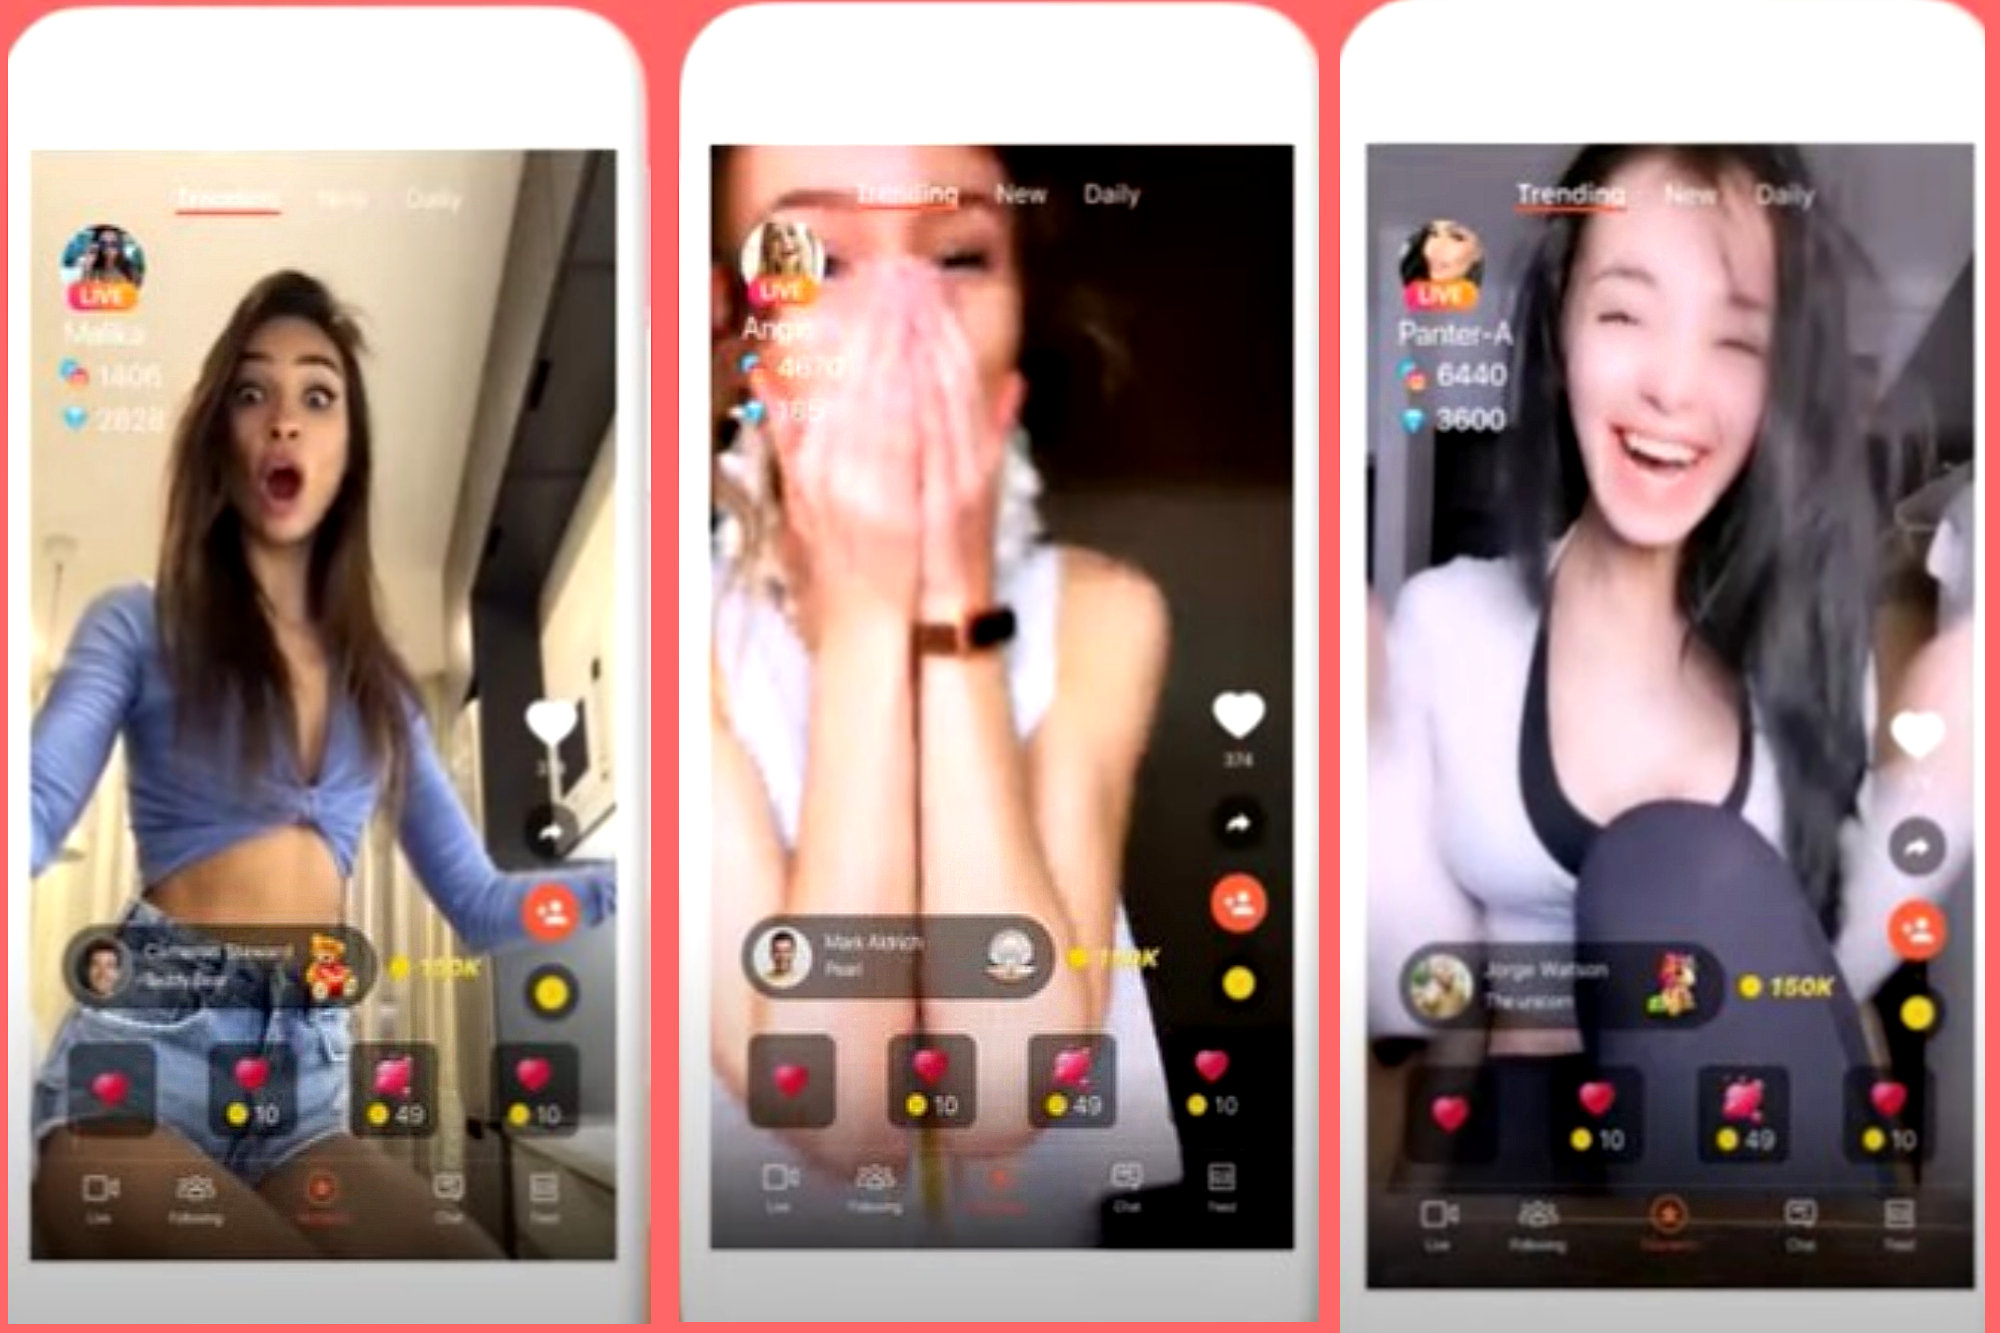 Live Streaming Apps That Pay You